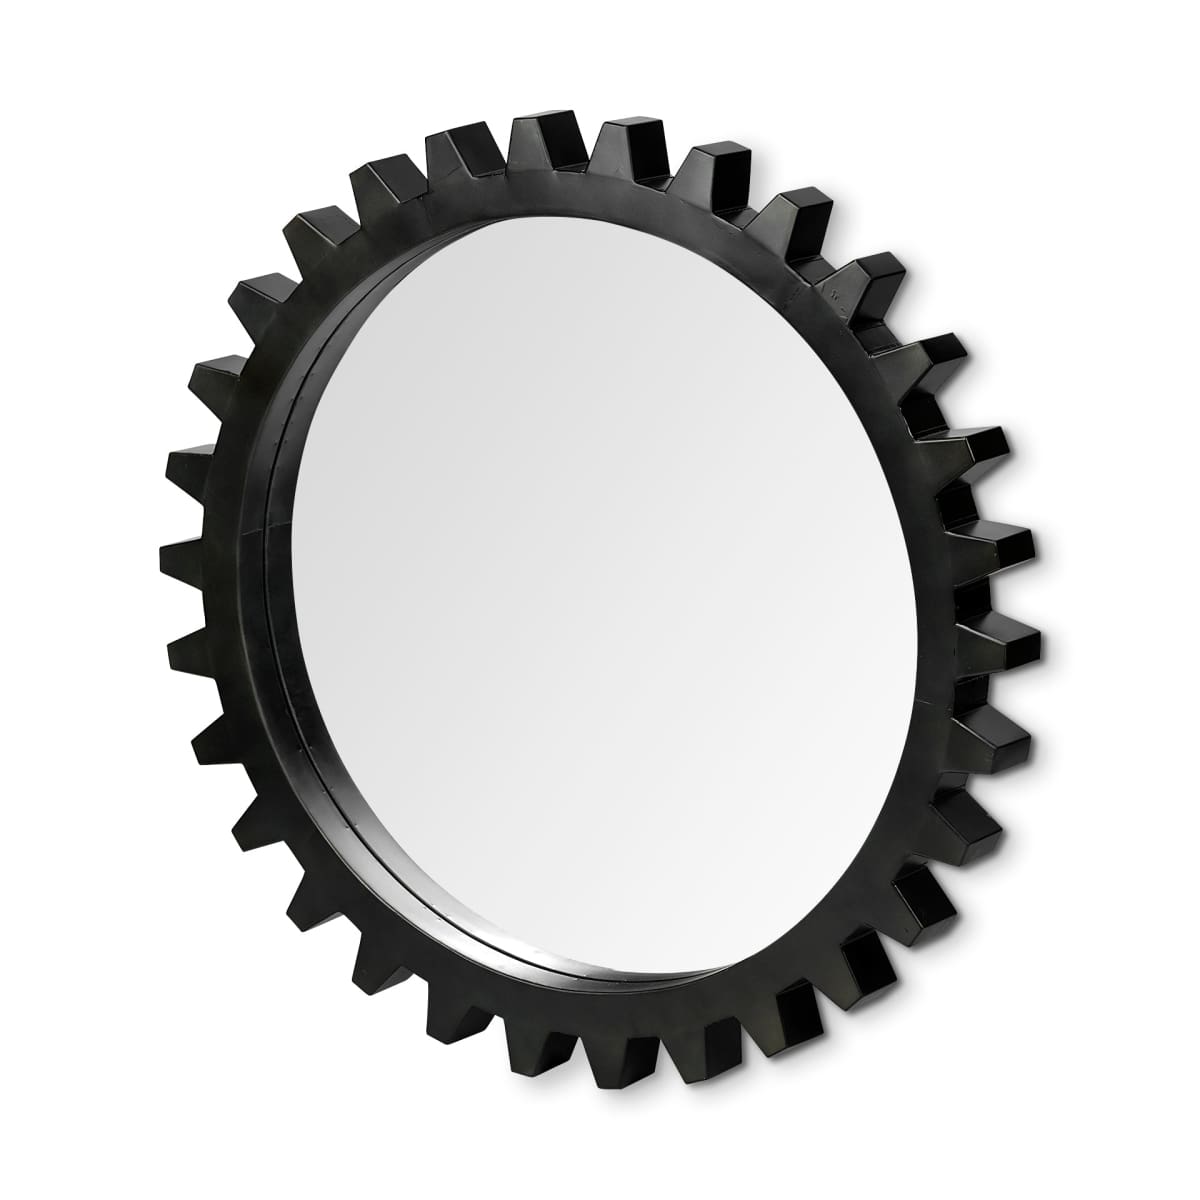 Cog Wall Mirror Alloy Black Metal | 37 - wall-mirrors-grouped